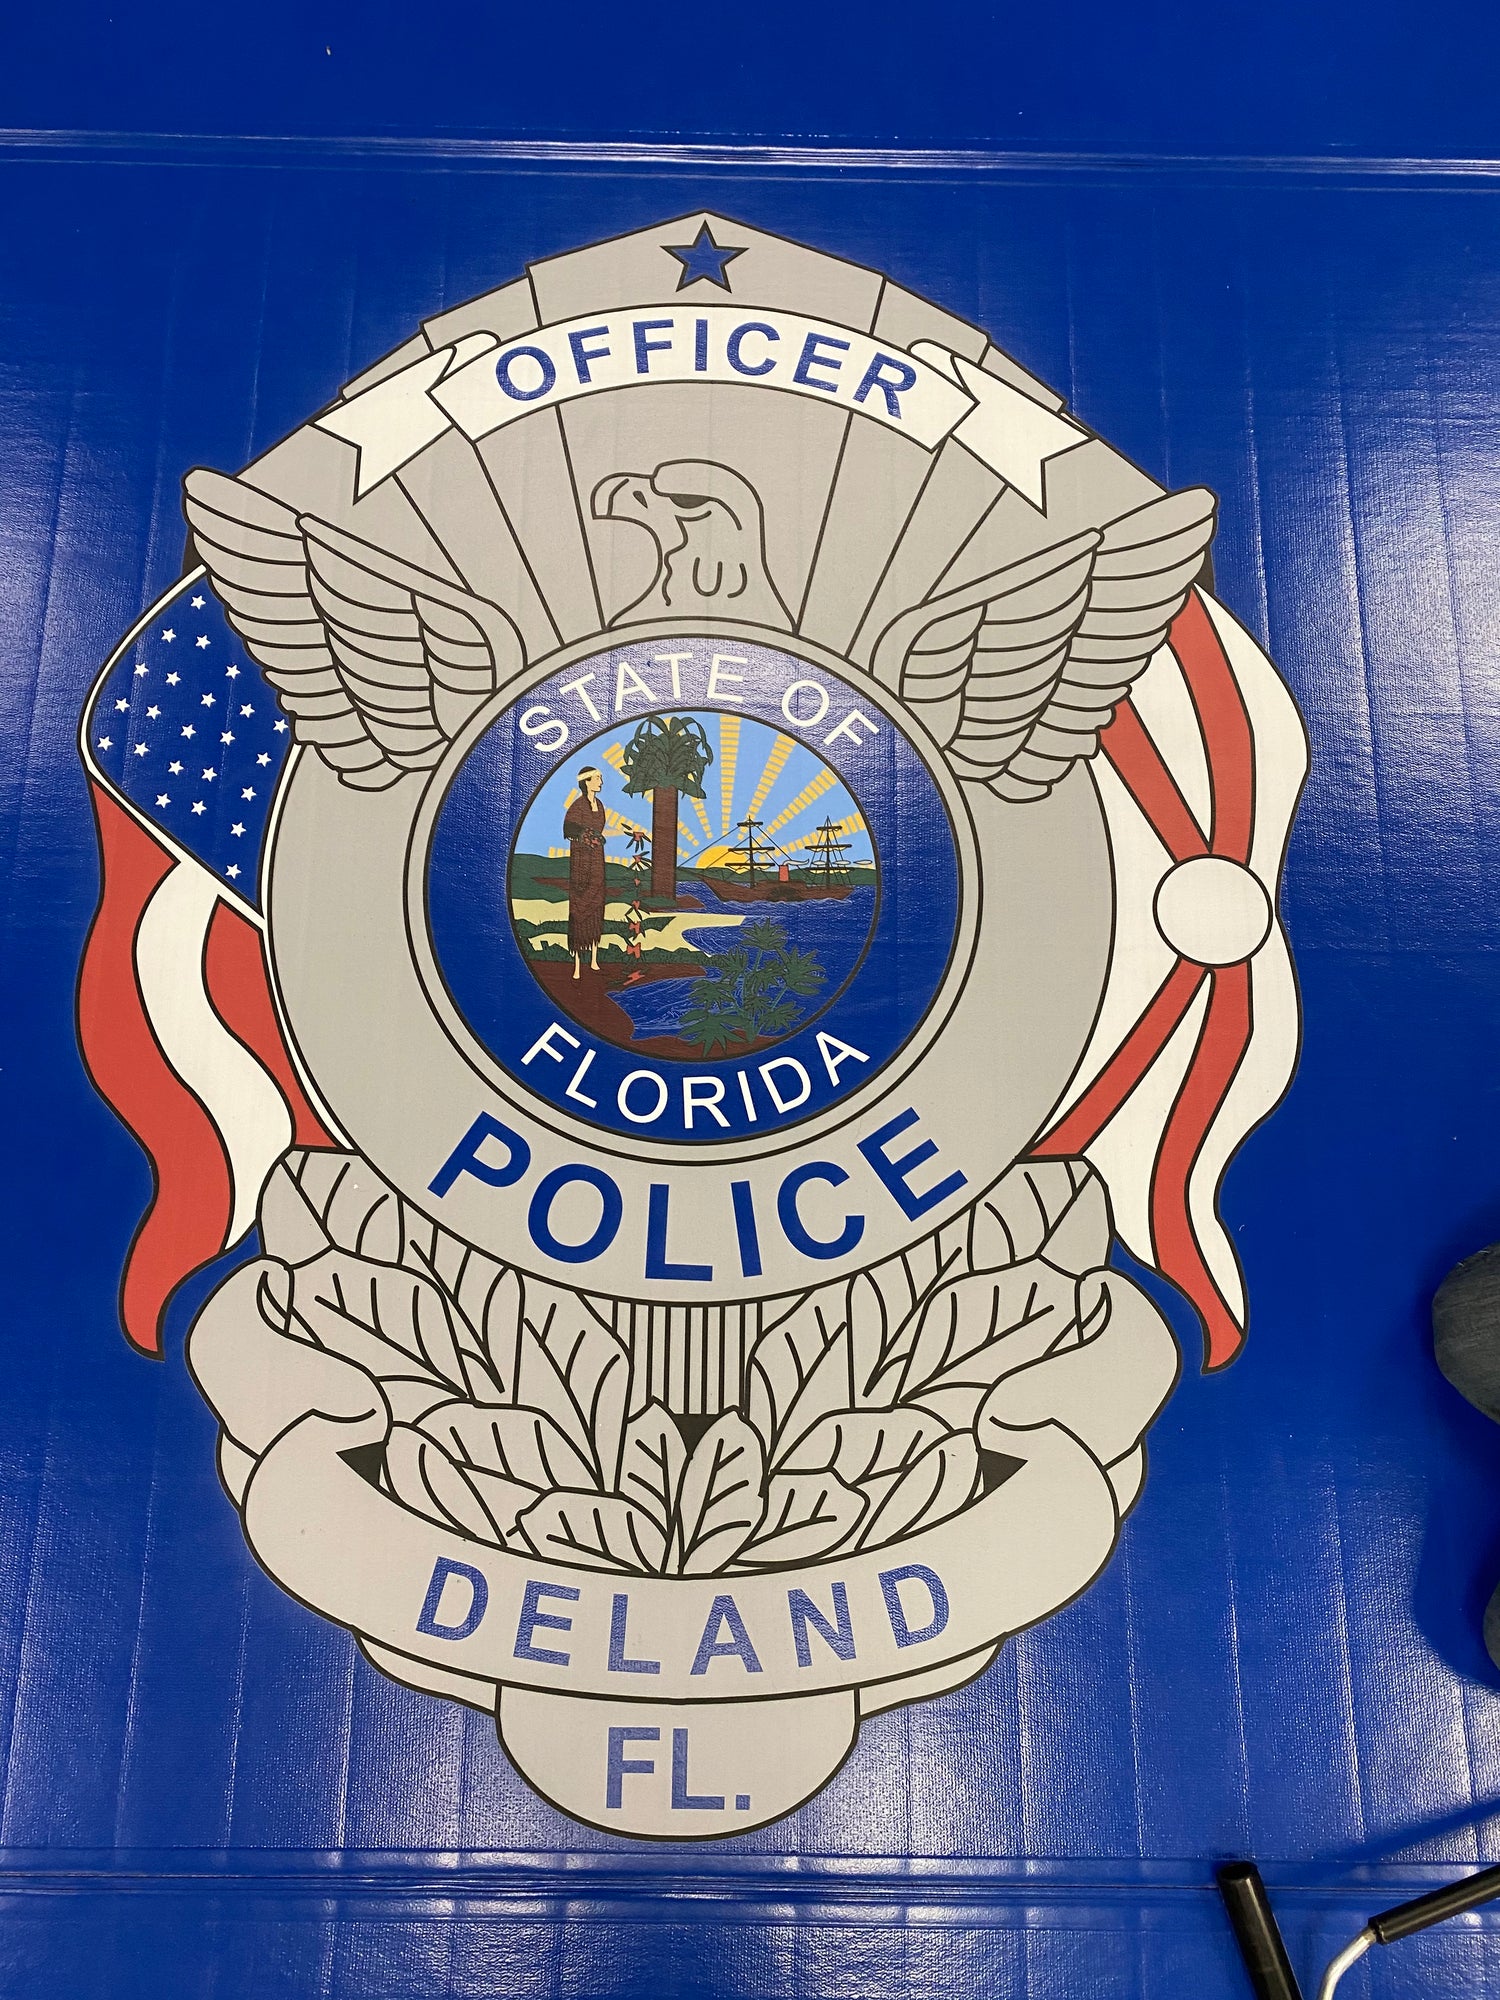 DELAND POLICE DEPT. SELECTS RESILITE FOR TACTICAL TRAINING FACILITY